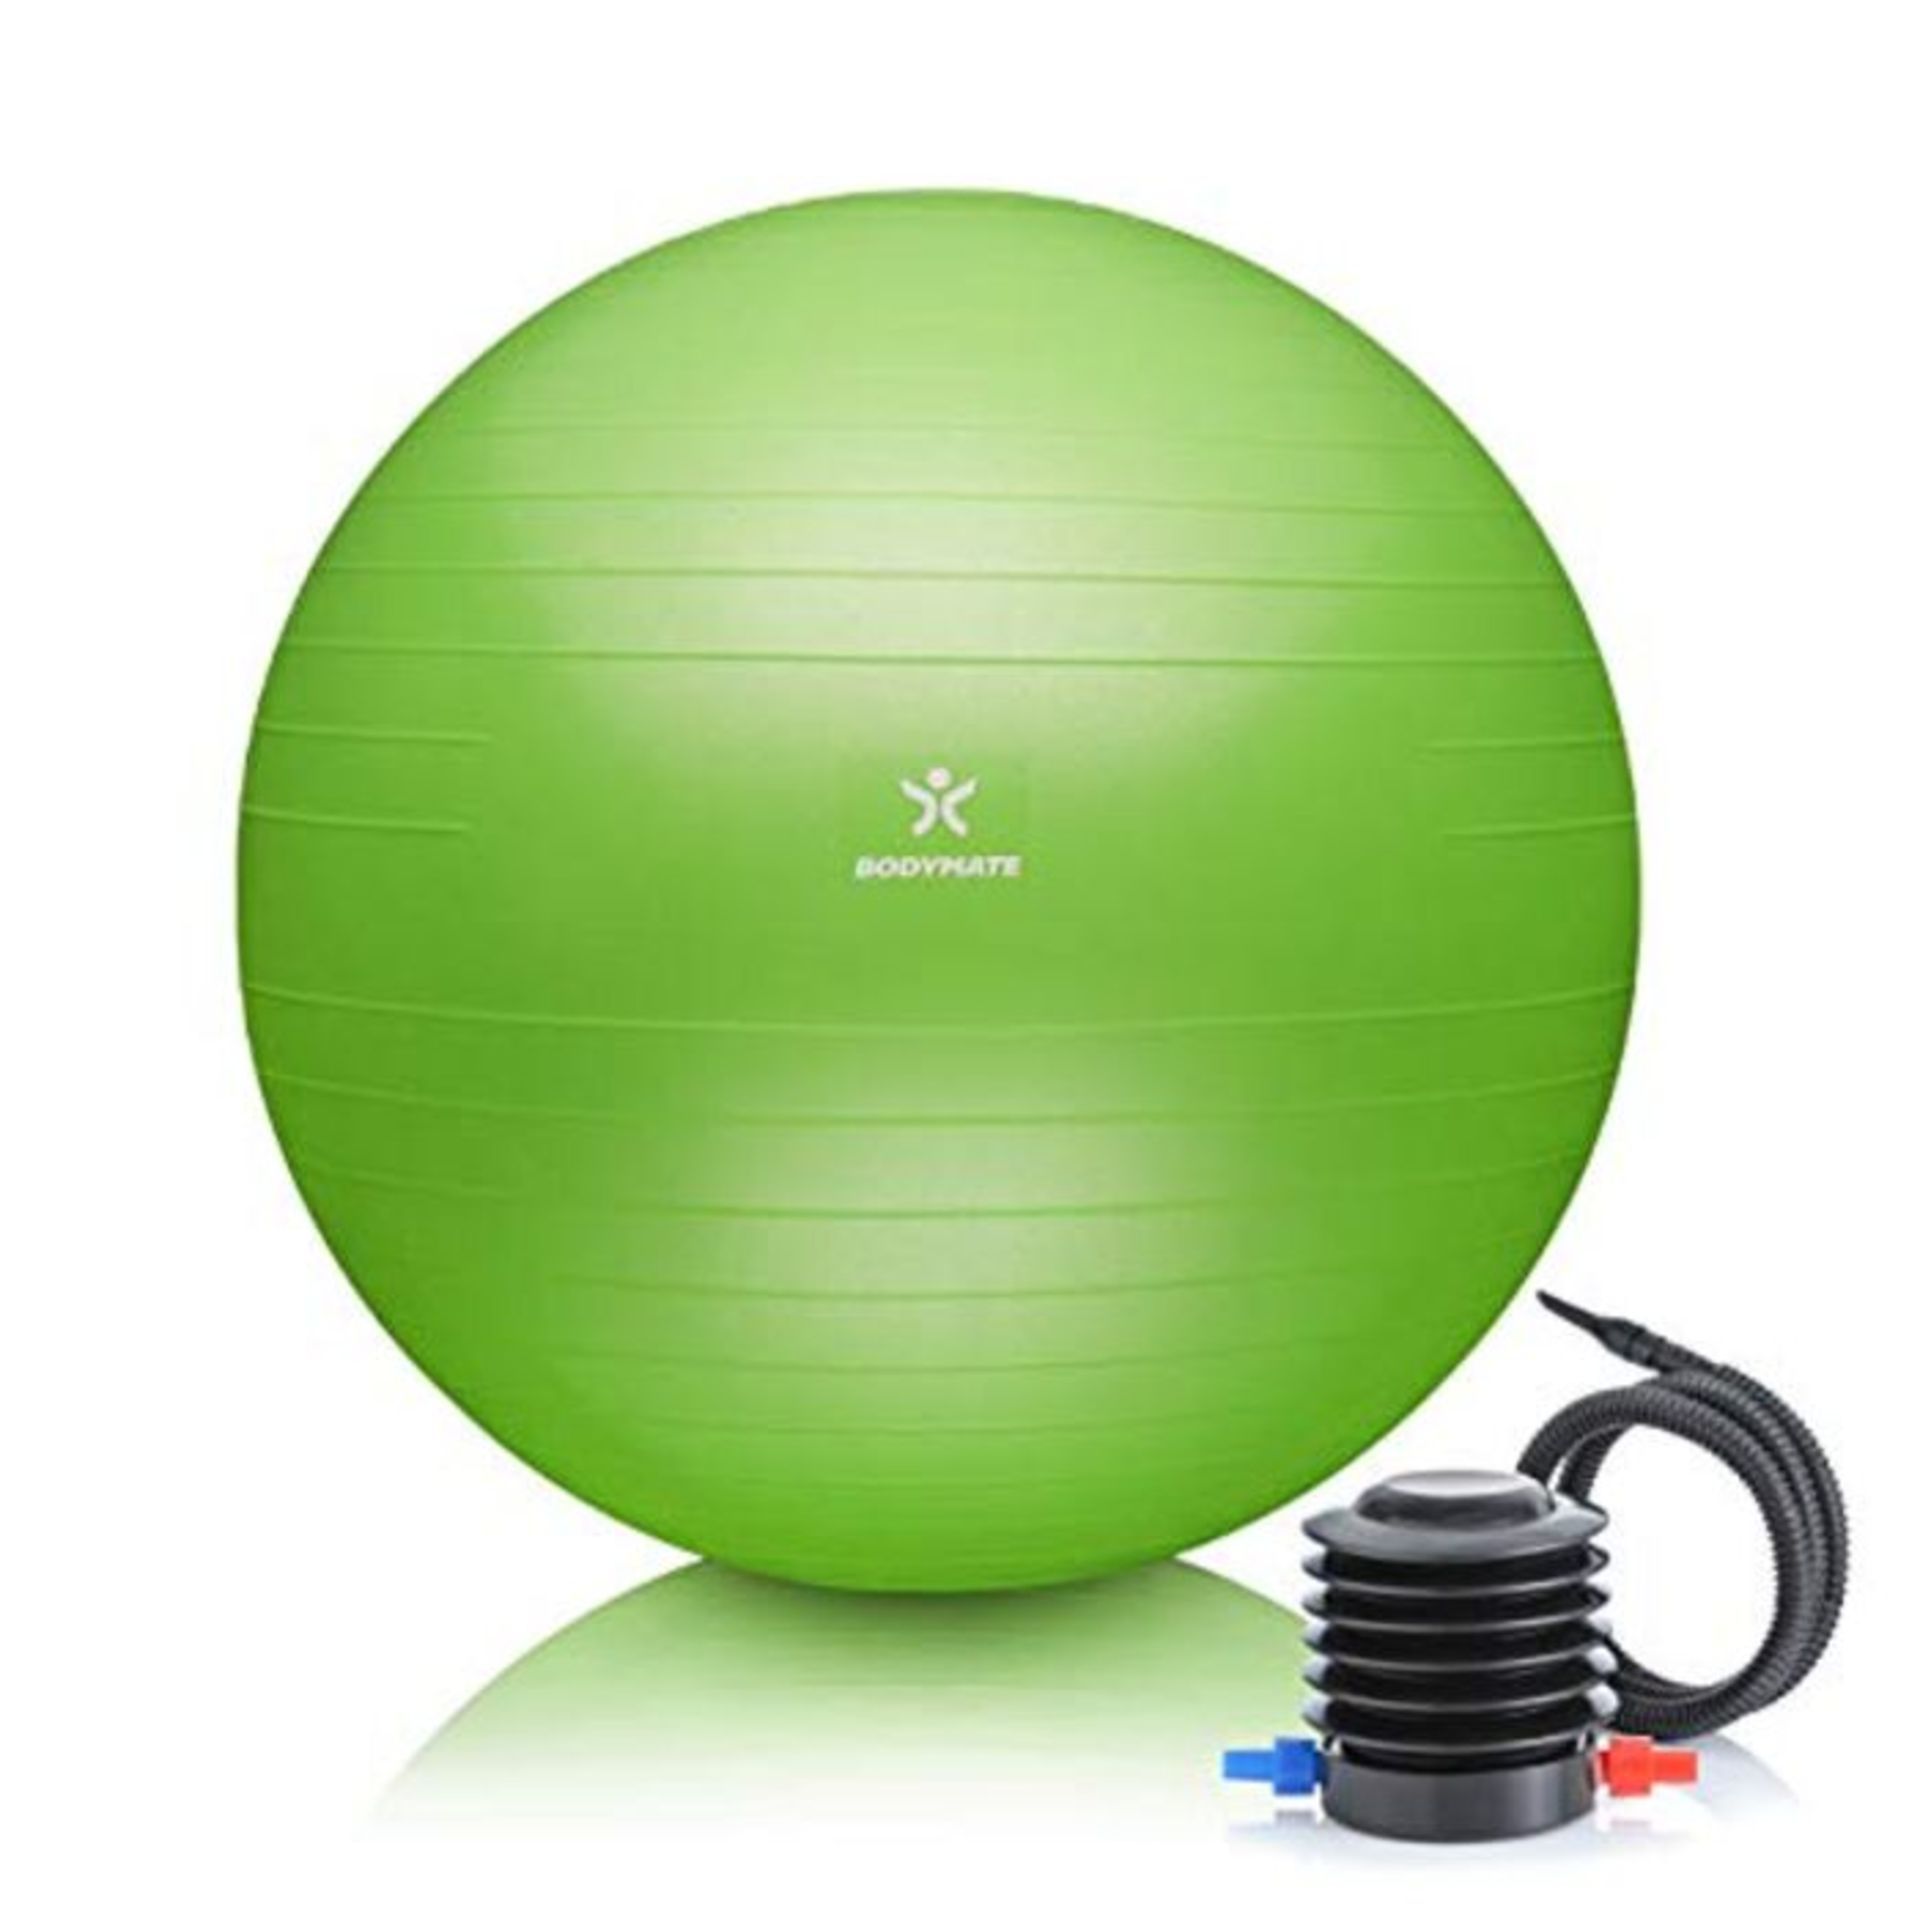 BODYMATE Exercise Ball - E-book with exercise guides included - Gym-quality Swiss ball